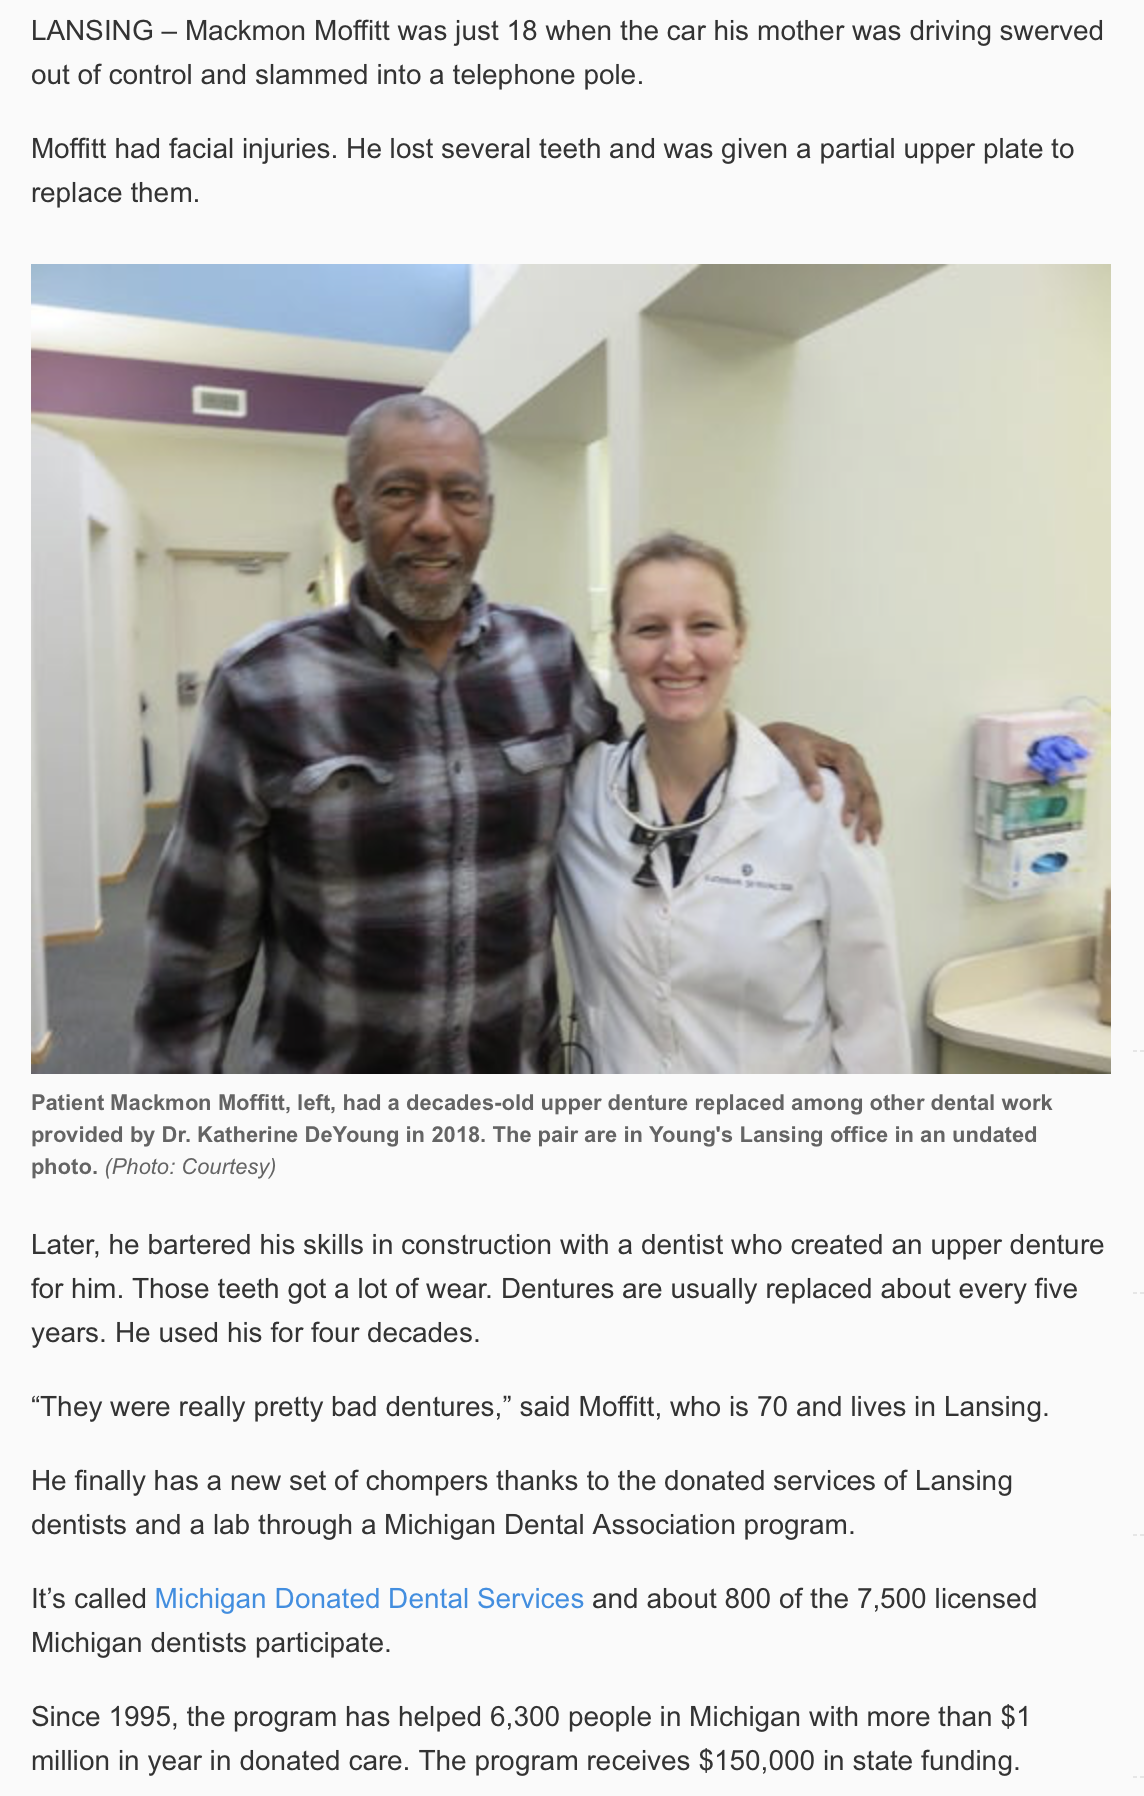 Lansing State Journal Donated Dental Services Story